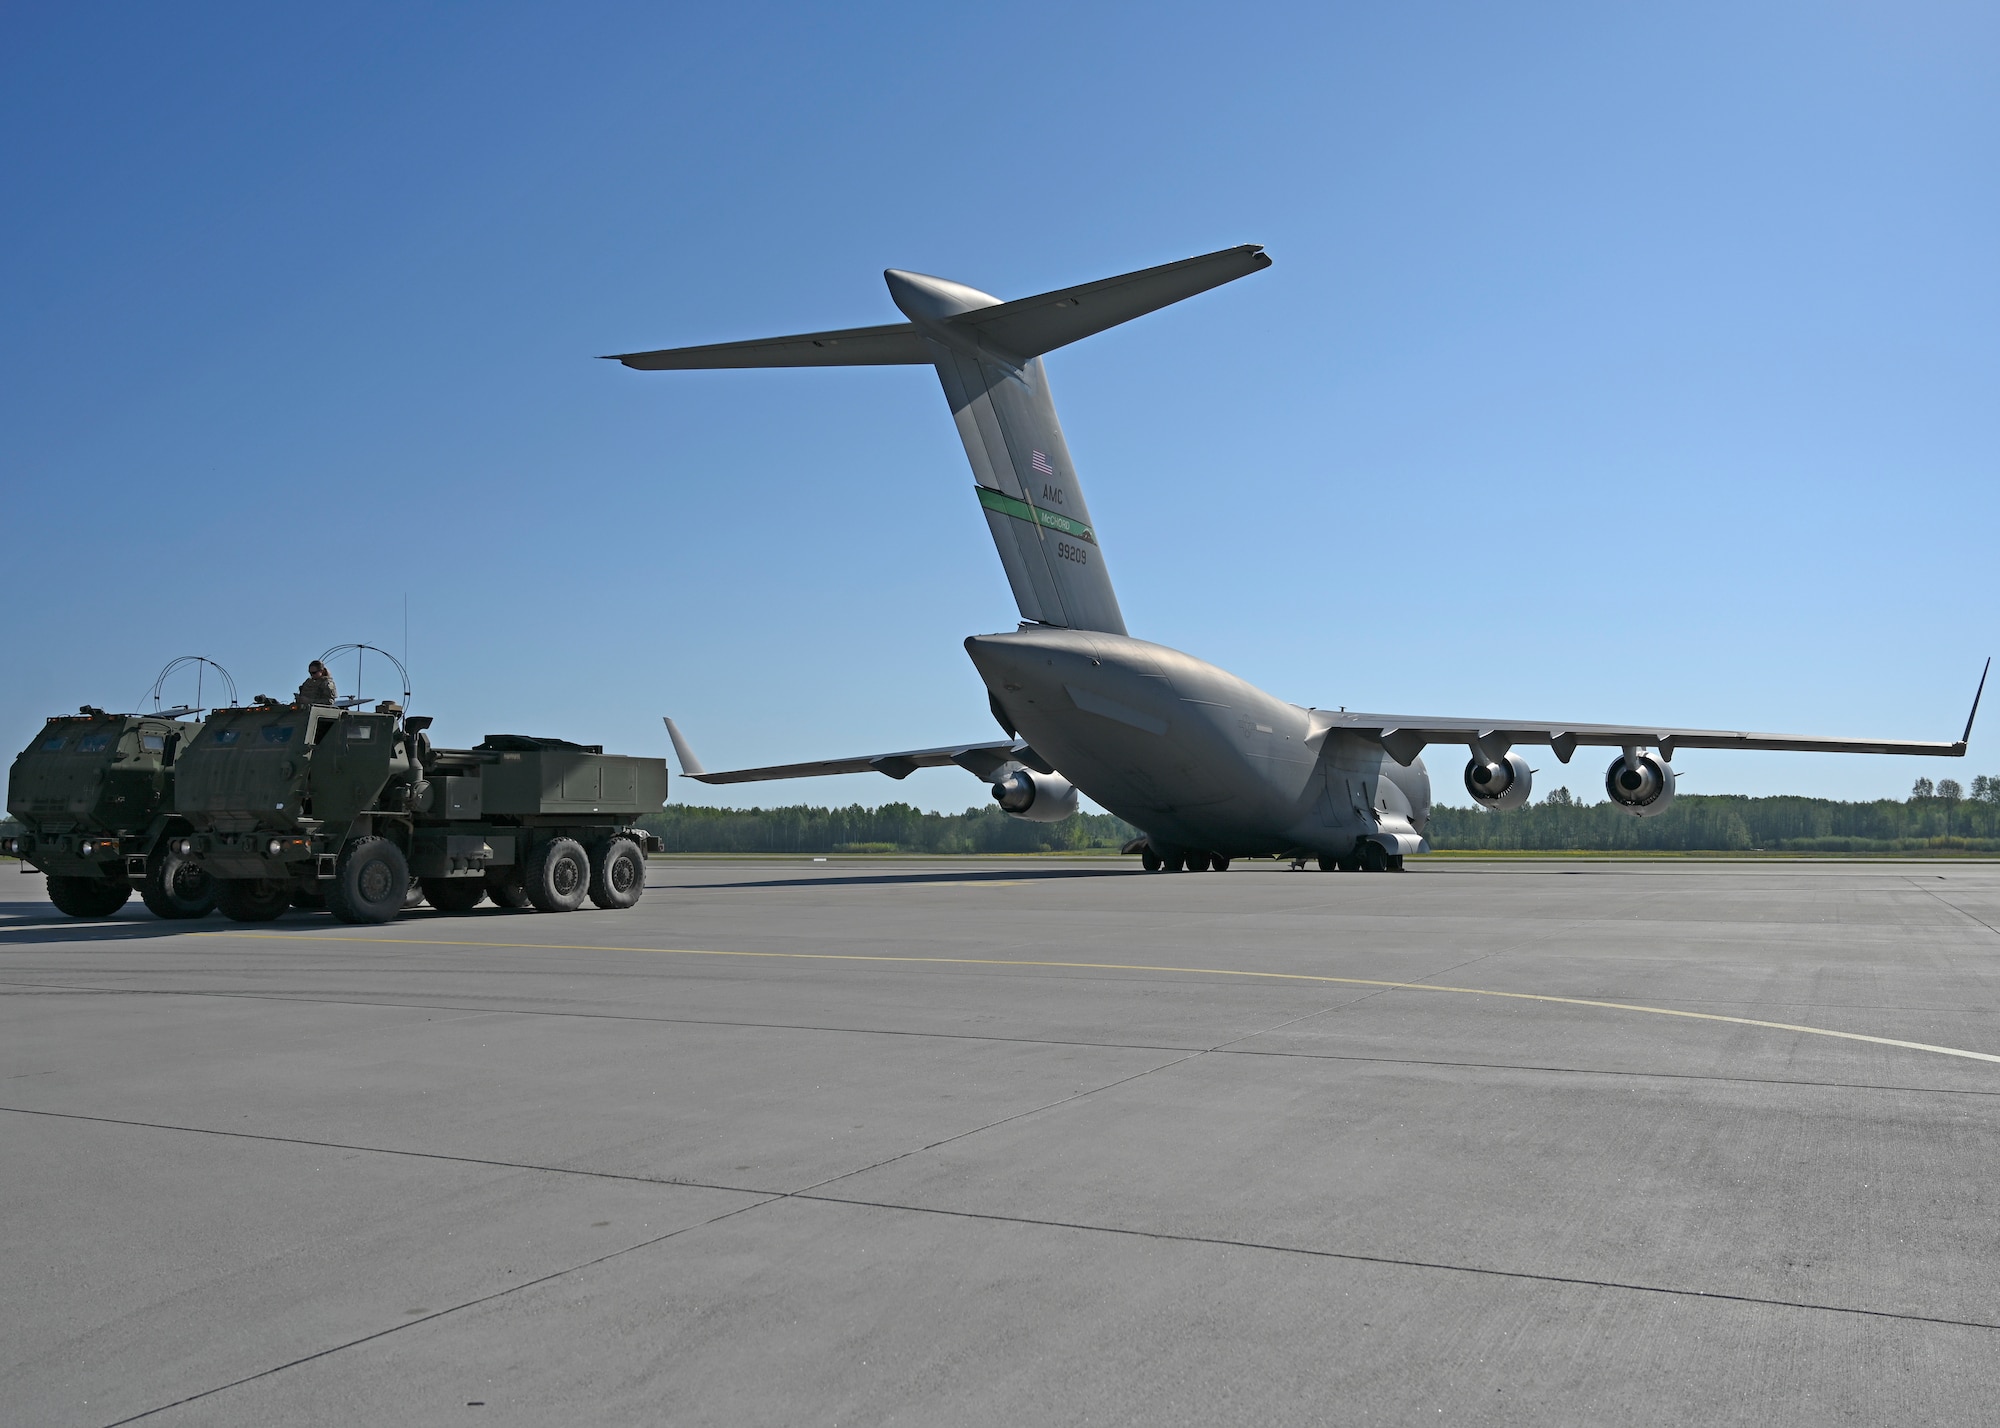 U.S. Army Soldiers with the 1st Battalion, 182nd Field Artillery Regiment prepare to load high mobility artillery rocket systems onto a C-17 Globemaster III assigned to the 62d Airlift Wing, during Exercise Swift Response in Lielvarde, Latvia, May 14, 2023. Swift Response is an exercise related to DEFENDER 23. DEFENDER 23 is a U.S. Army Europe and Africa-led exercise, supported by U.S. Air Forces in Europe – Air Forces Africa, focused on the strategic deployment of continental United States-based forces and interoperability with Allies and partners. Taking place from April 22 to June 23, DEFENDER 23 demonstrates the U.S. Air Force’s ability to aggregate U.S.-based combat power quickly in Europe; increase lethality of the NATO Alliance through the U.S. Air Force’s Agile Combat Employment; build unit readiness in a complex joint, multinational environment; and leverage host nation capabilities to increase USAFE-AFAFRICA’s operational reach. DEFENDER 23 includes more than 7,800 U.S. and 15,000 multi-national service members from various Allied and partner nations. (U.S Air Force photo by Senior Airman Callie Norton)